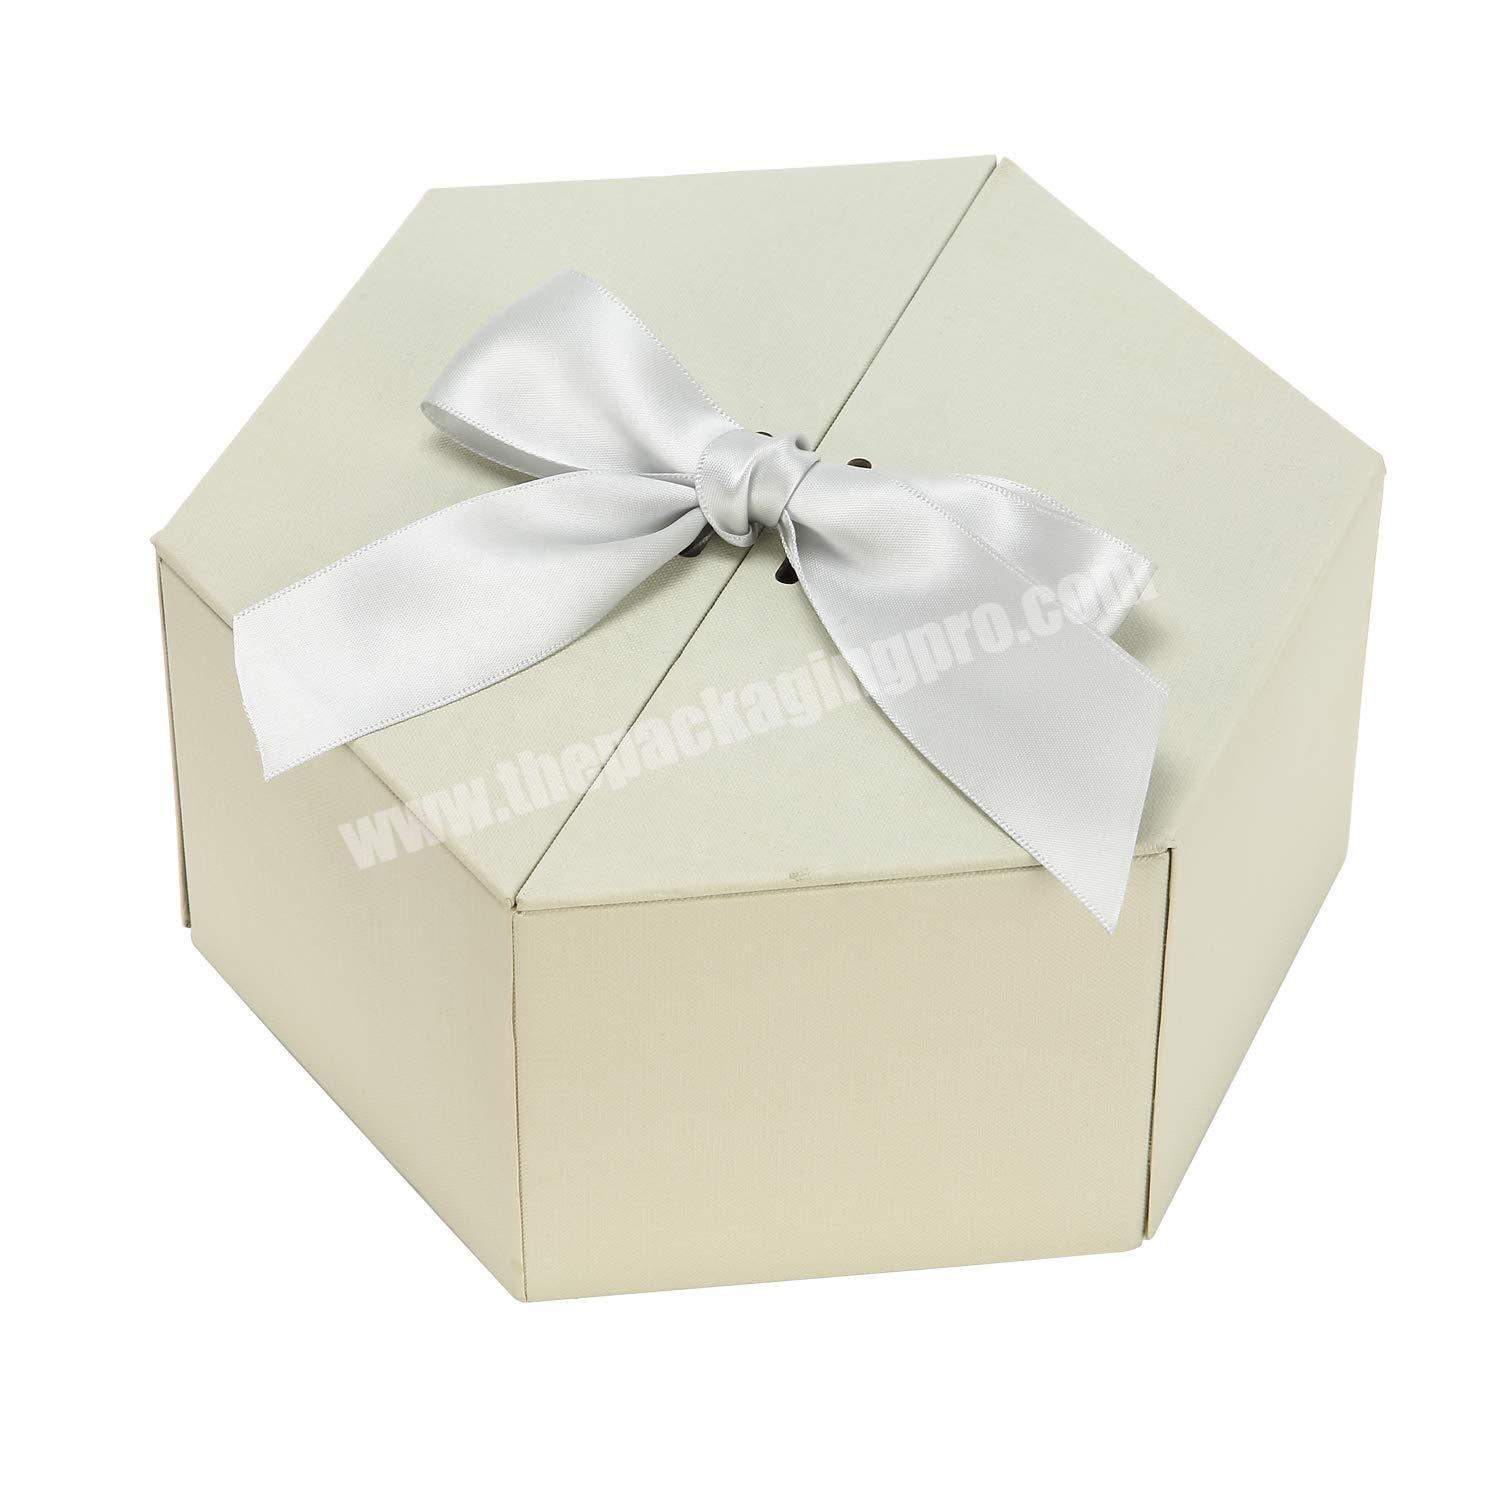 Hexagon  Boxes with LidsChristmas Gifts, Wedding, Birthday, and Valentines Day